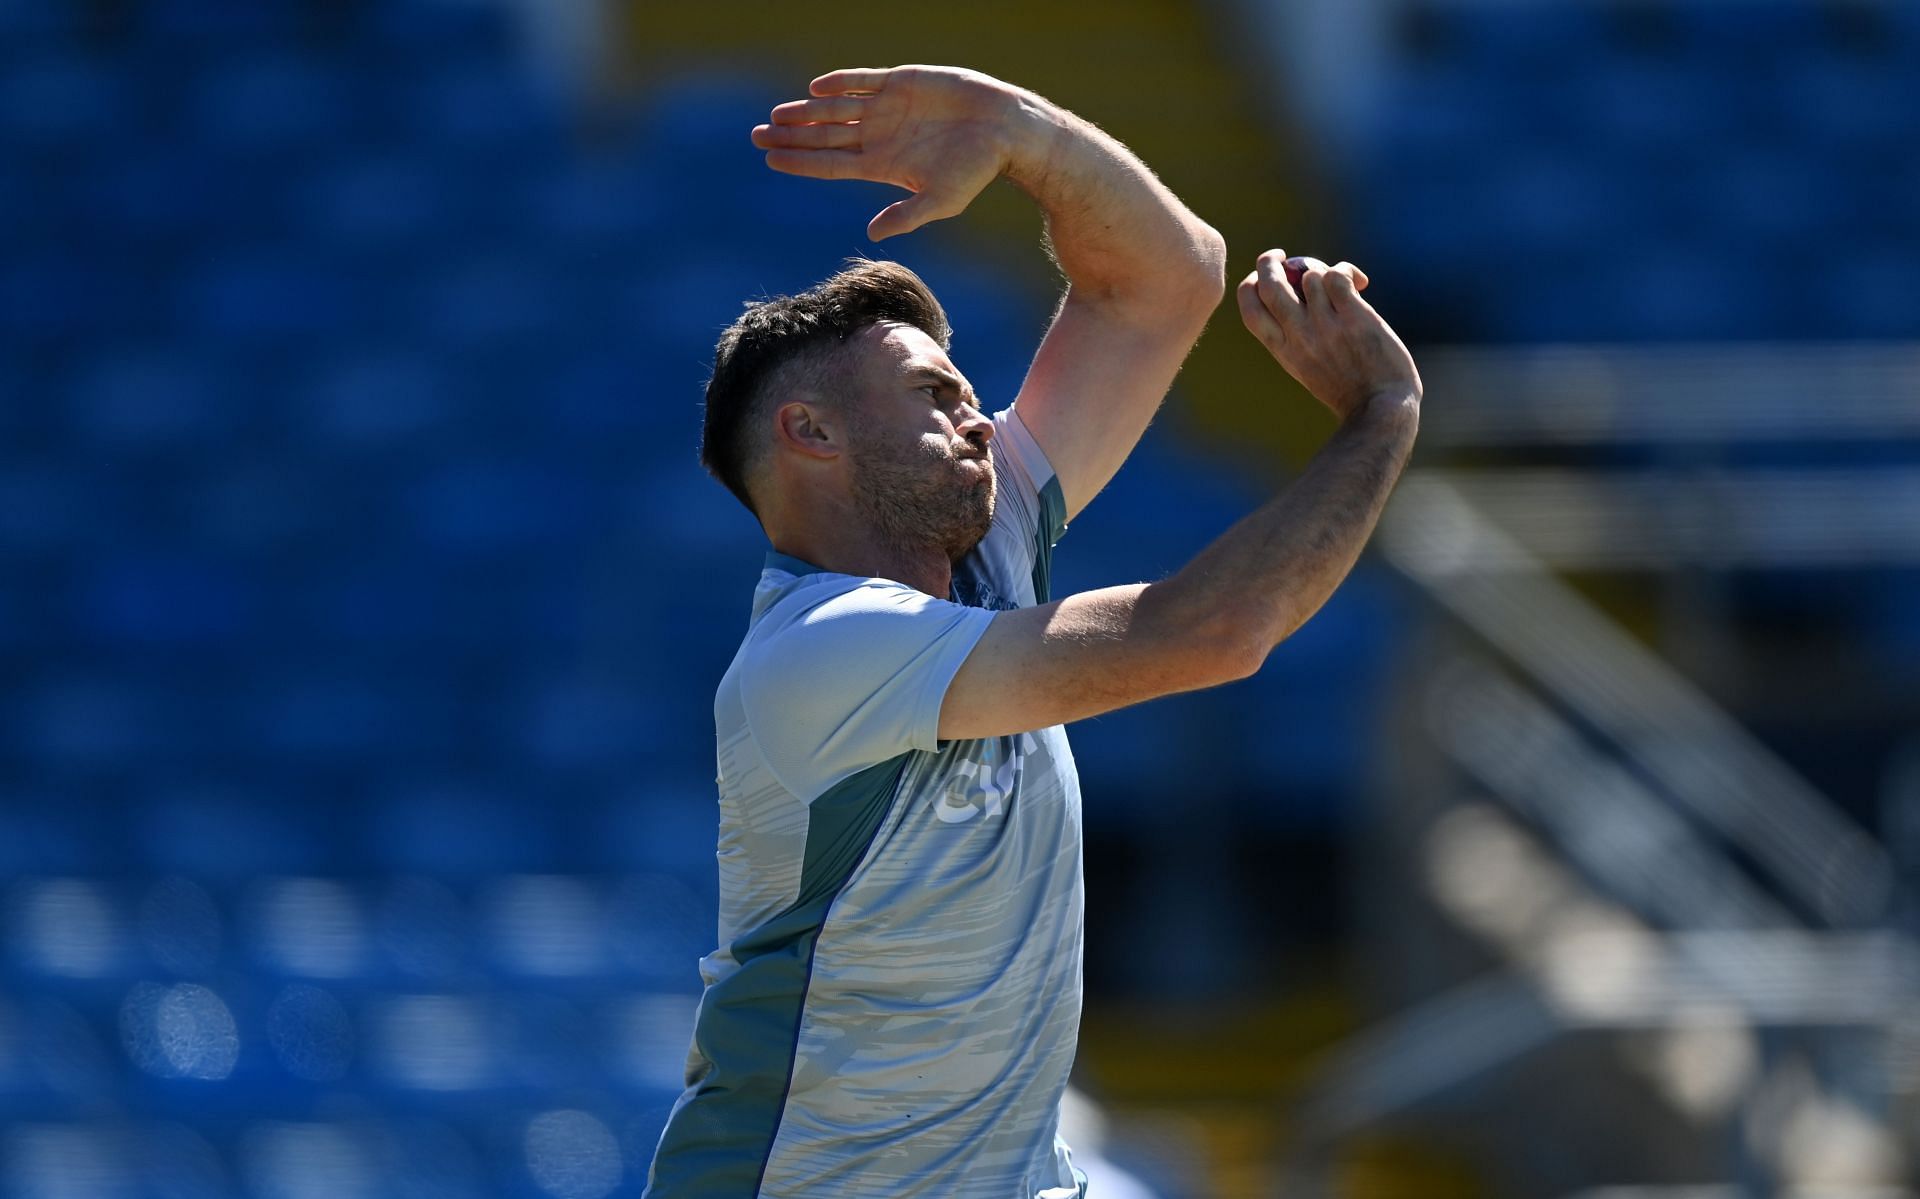 James Anderson missed the 3rd Test against New Zealand owing to an ankle injury